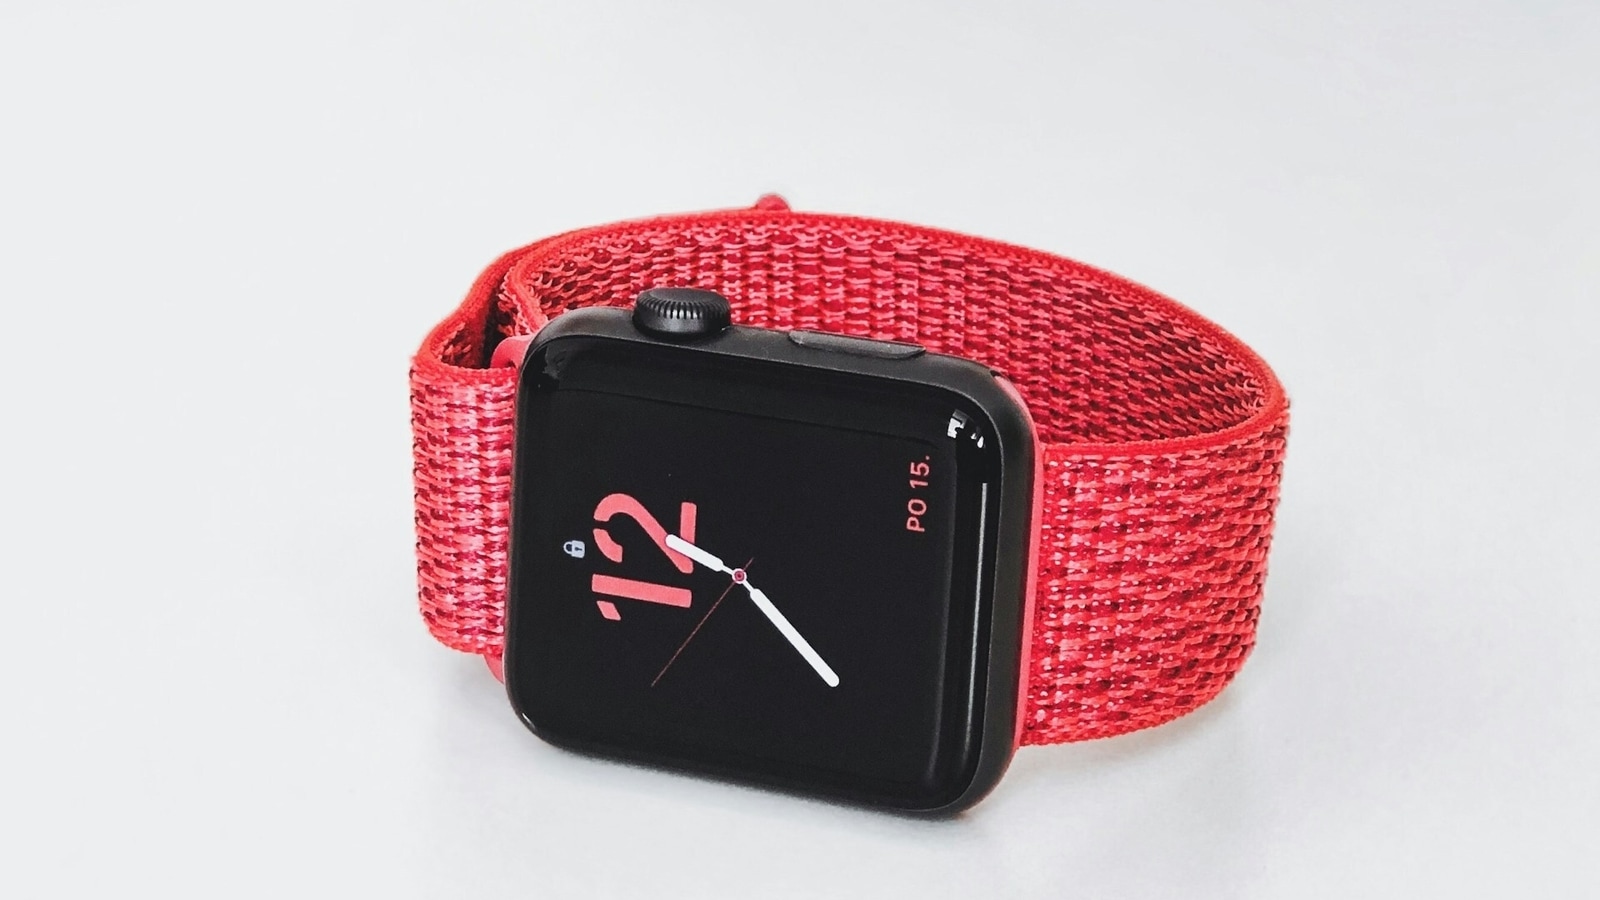 Fire-Boltt Ninja Fit Smartwatch Full Touch with IP68, Multi UI Screen  Smartwatch Price in India - Buy Fire-Boltt Ninja Fit Smartwatch Full Touch  with IP68, Multi UI Screen Smartwatch online at Flipkart.com